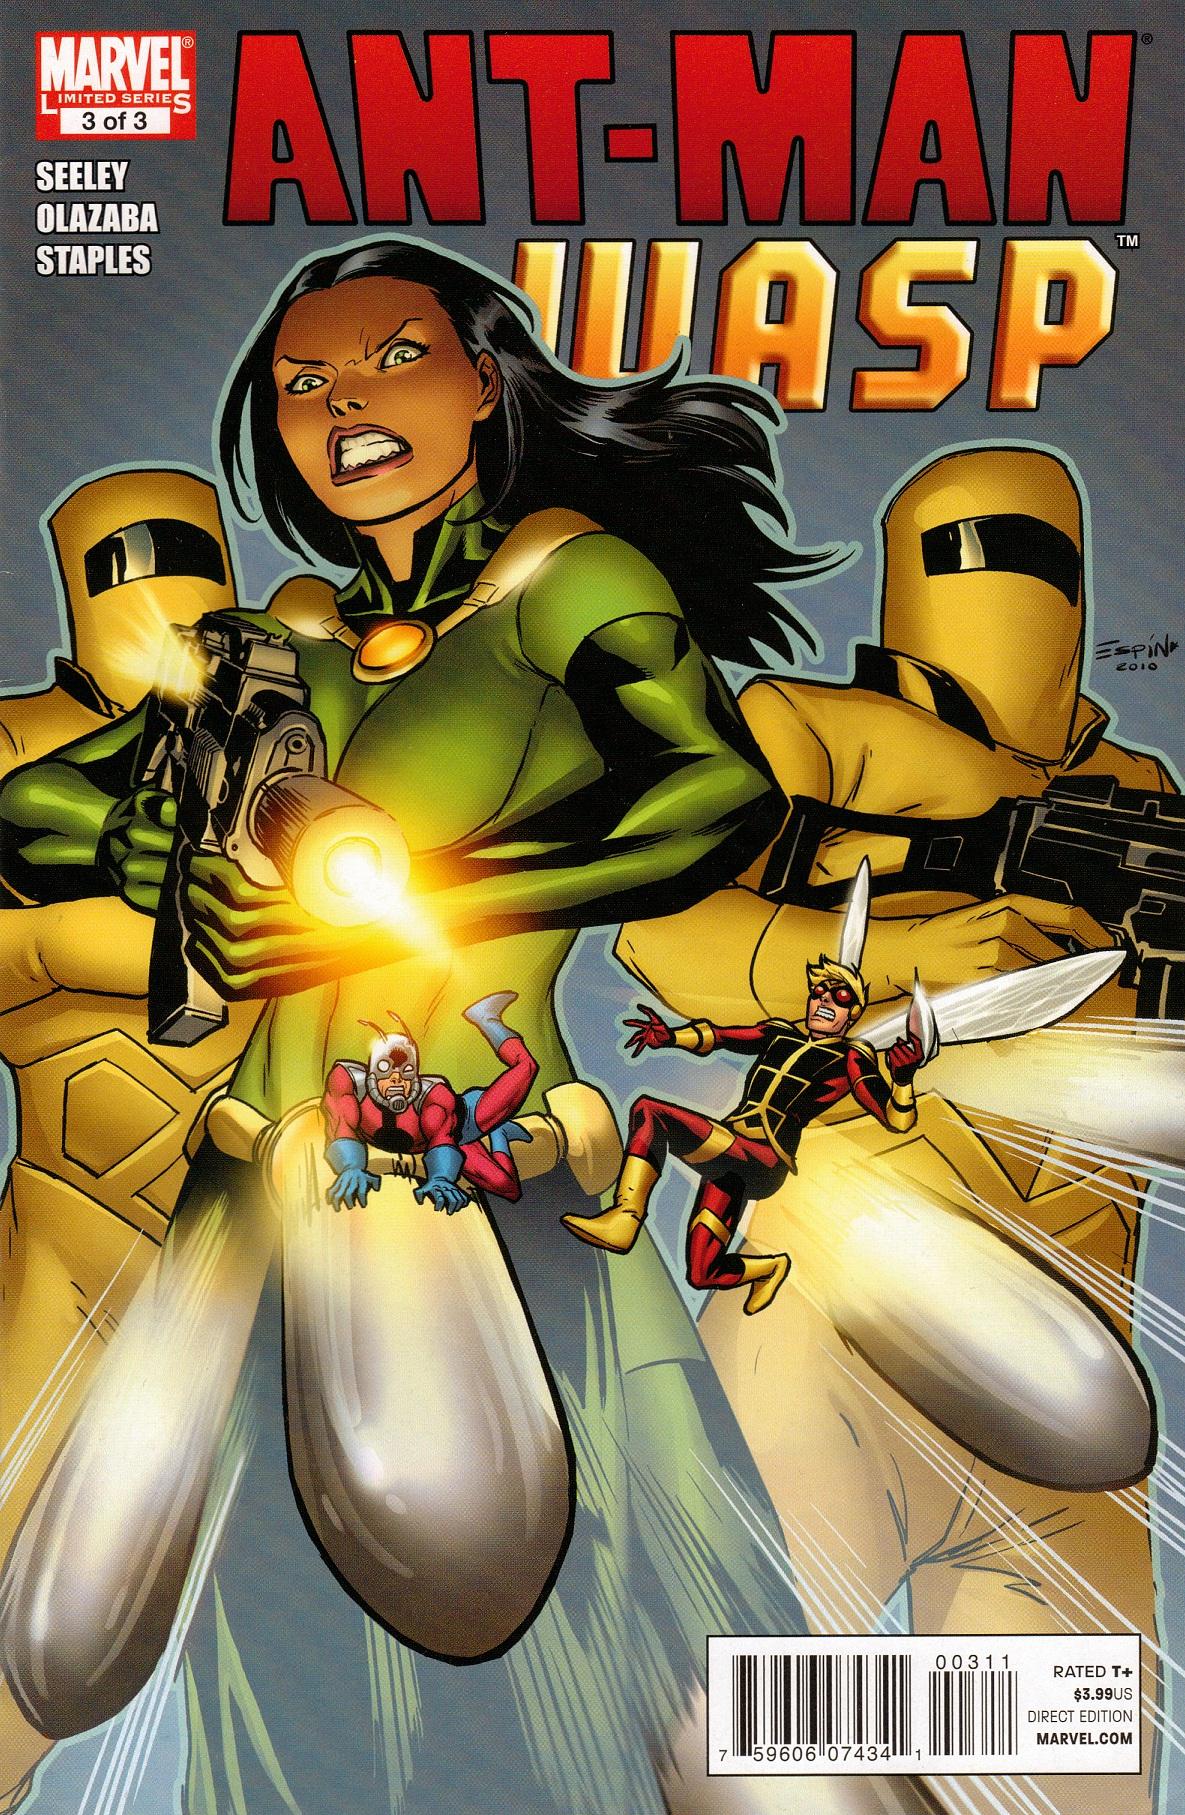 Ant-Man & The Wasp Vol. 1 #3